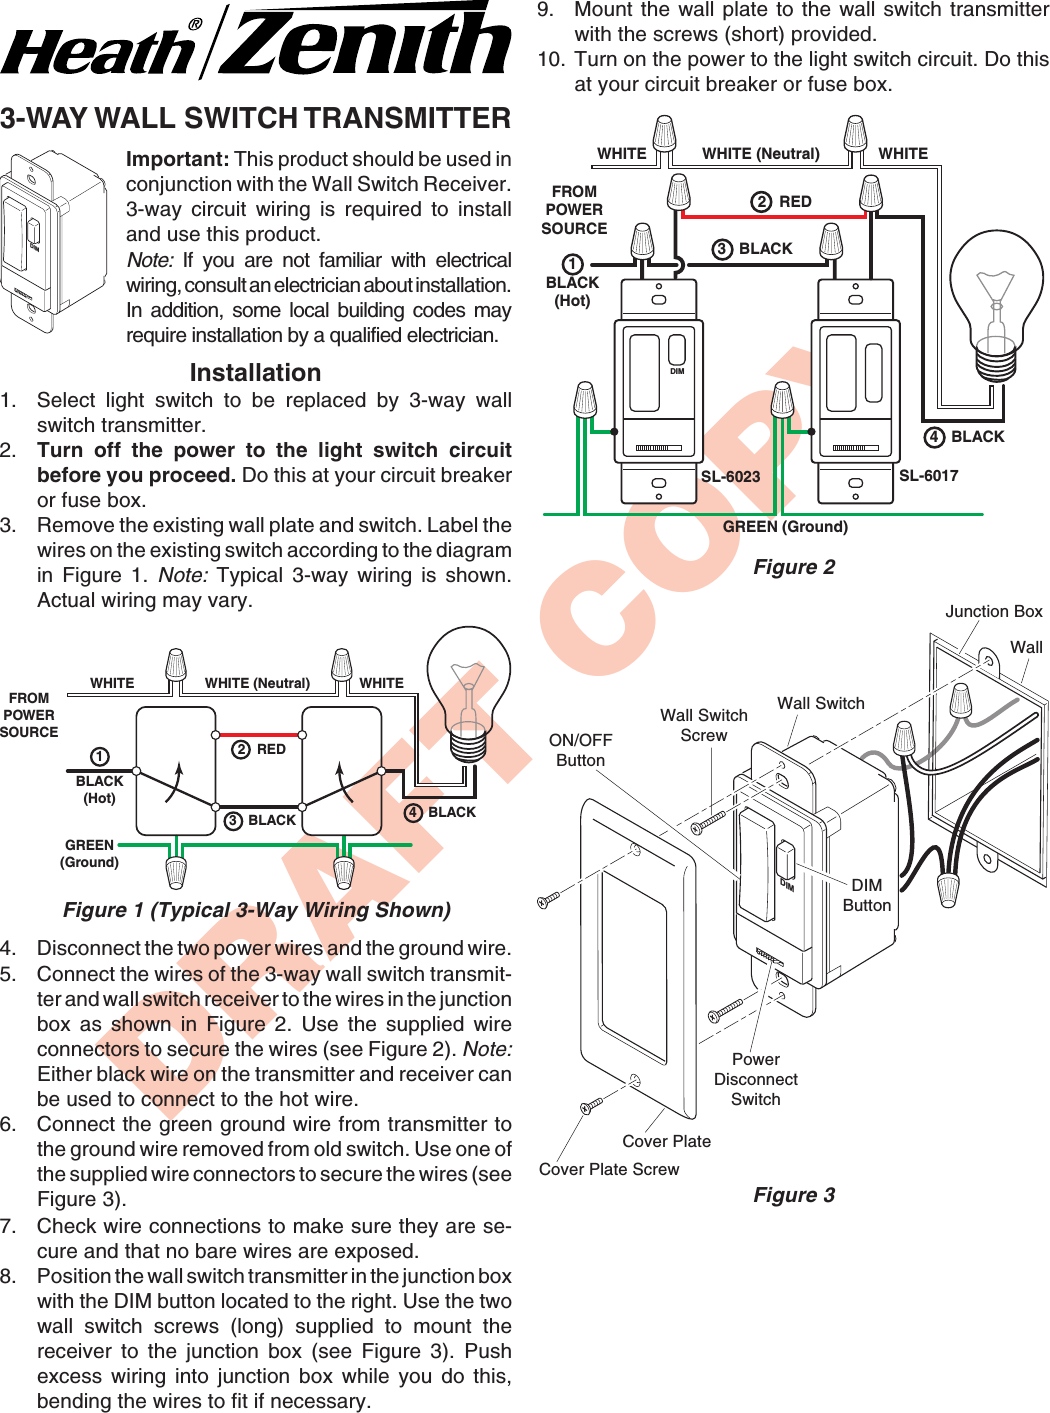 DRAFT COPY3-WAY WALL SWITCH TRANSMITTERDIMDIMImportant: This product should be used inconjunction with the Wall Switch Receiver.3-way circuit wiring is required to installand use this product.Note: If you are not familiar with electricalwiring, consult an electrician about installation.In addition, some local building codes mayrequire installation by a qualified electrician.Installation1. Select light switch to be replaced by 3-way wallswitch transmitter.2. Turn off the power to the light switch circuitbefore you proceed. Do this at your circuit breakeror fuse box.3. Remove the existing wall plate and switch. Label thewires on the existing switch according to the diagramin Figure 1. Note: Typical 3-way wiring is shown.Actual wiring may vary.WHITEFROMPOWERSOURCEWHITE (Neutral) WHITE1BLACK(Hot)GREEN(Ground)2   RED4   BLACK3   BLACKFigure 1 (Typical 3-Way Wiring Shown)4. Disconnect the two power wires and the ground wire.5. Connect the wires of the 3-way wall switch transmit-ter and wall switch receiver to the wires in the junctionbox as shown in Figure 2. Use the supplied wireconnectors to secure the wires (see Figure 2). Note:Either black wire on the transmitter and receiver canbe used to connect to the hot wire.6. Connect the green ground wire from transmitter tothe ground wire removed from old switch. Use one ofthe supplied wire connectors to secure the wires (seeFigure 3).7. Check wire connections to make sure they are se-cure and that no bare wires are exposed.8. Position the wall switch transmitter in the junction boxwith the DIM button located to the right. Use the twowall switch screws (long) supplied to mount thereceiver to the junction box (see Figure 3). Pushexcess wiring into junction box while you do this,bending the wires to fit if necessary.GREEN (Ground)WHITEFROMPOWERSOURCE1BLACK(Hot)WHITE (Neutral)SL-6017WHITESL-6023DIM2   RED3   BLACK4   BLACKFigure 2Figure 3Wall SwitchScrewJunction BoxWall SwitchON/OFFButtonDIMButtonWallPowerDisconnectSwitchCover PlateCover Plate Screw9. Mount the wall plate to the wall switch transmitterwith the screws (short) provided.10. Turn on the power to the light switch circuit. Do thisat your circuit breaker or fuse box.